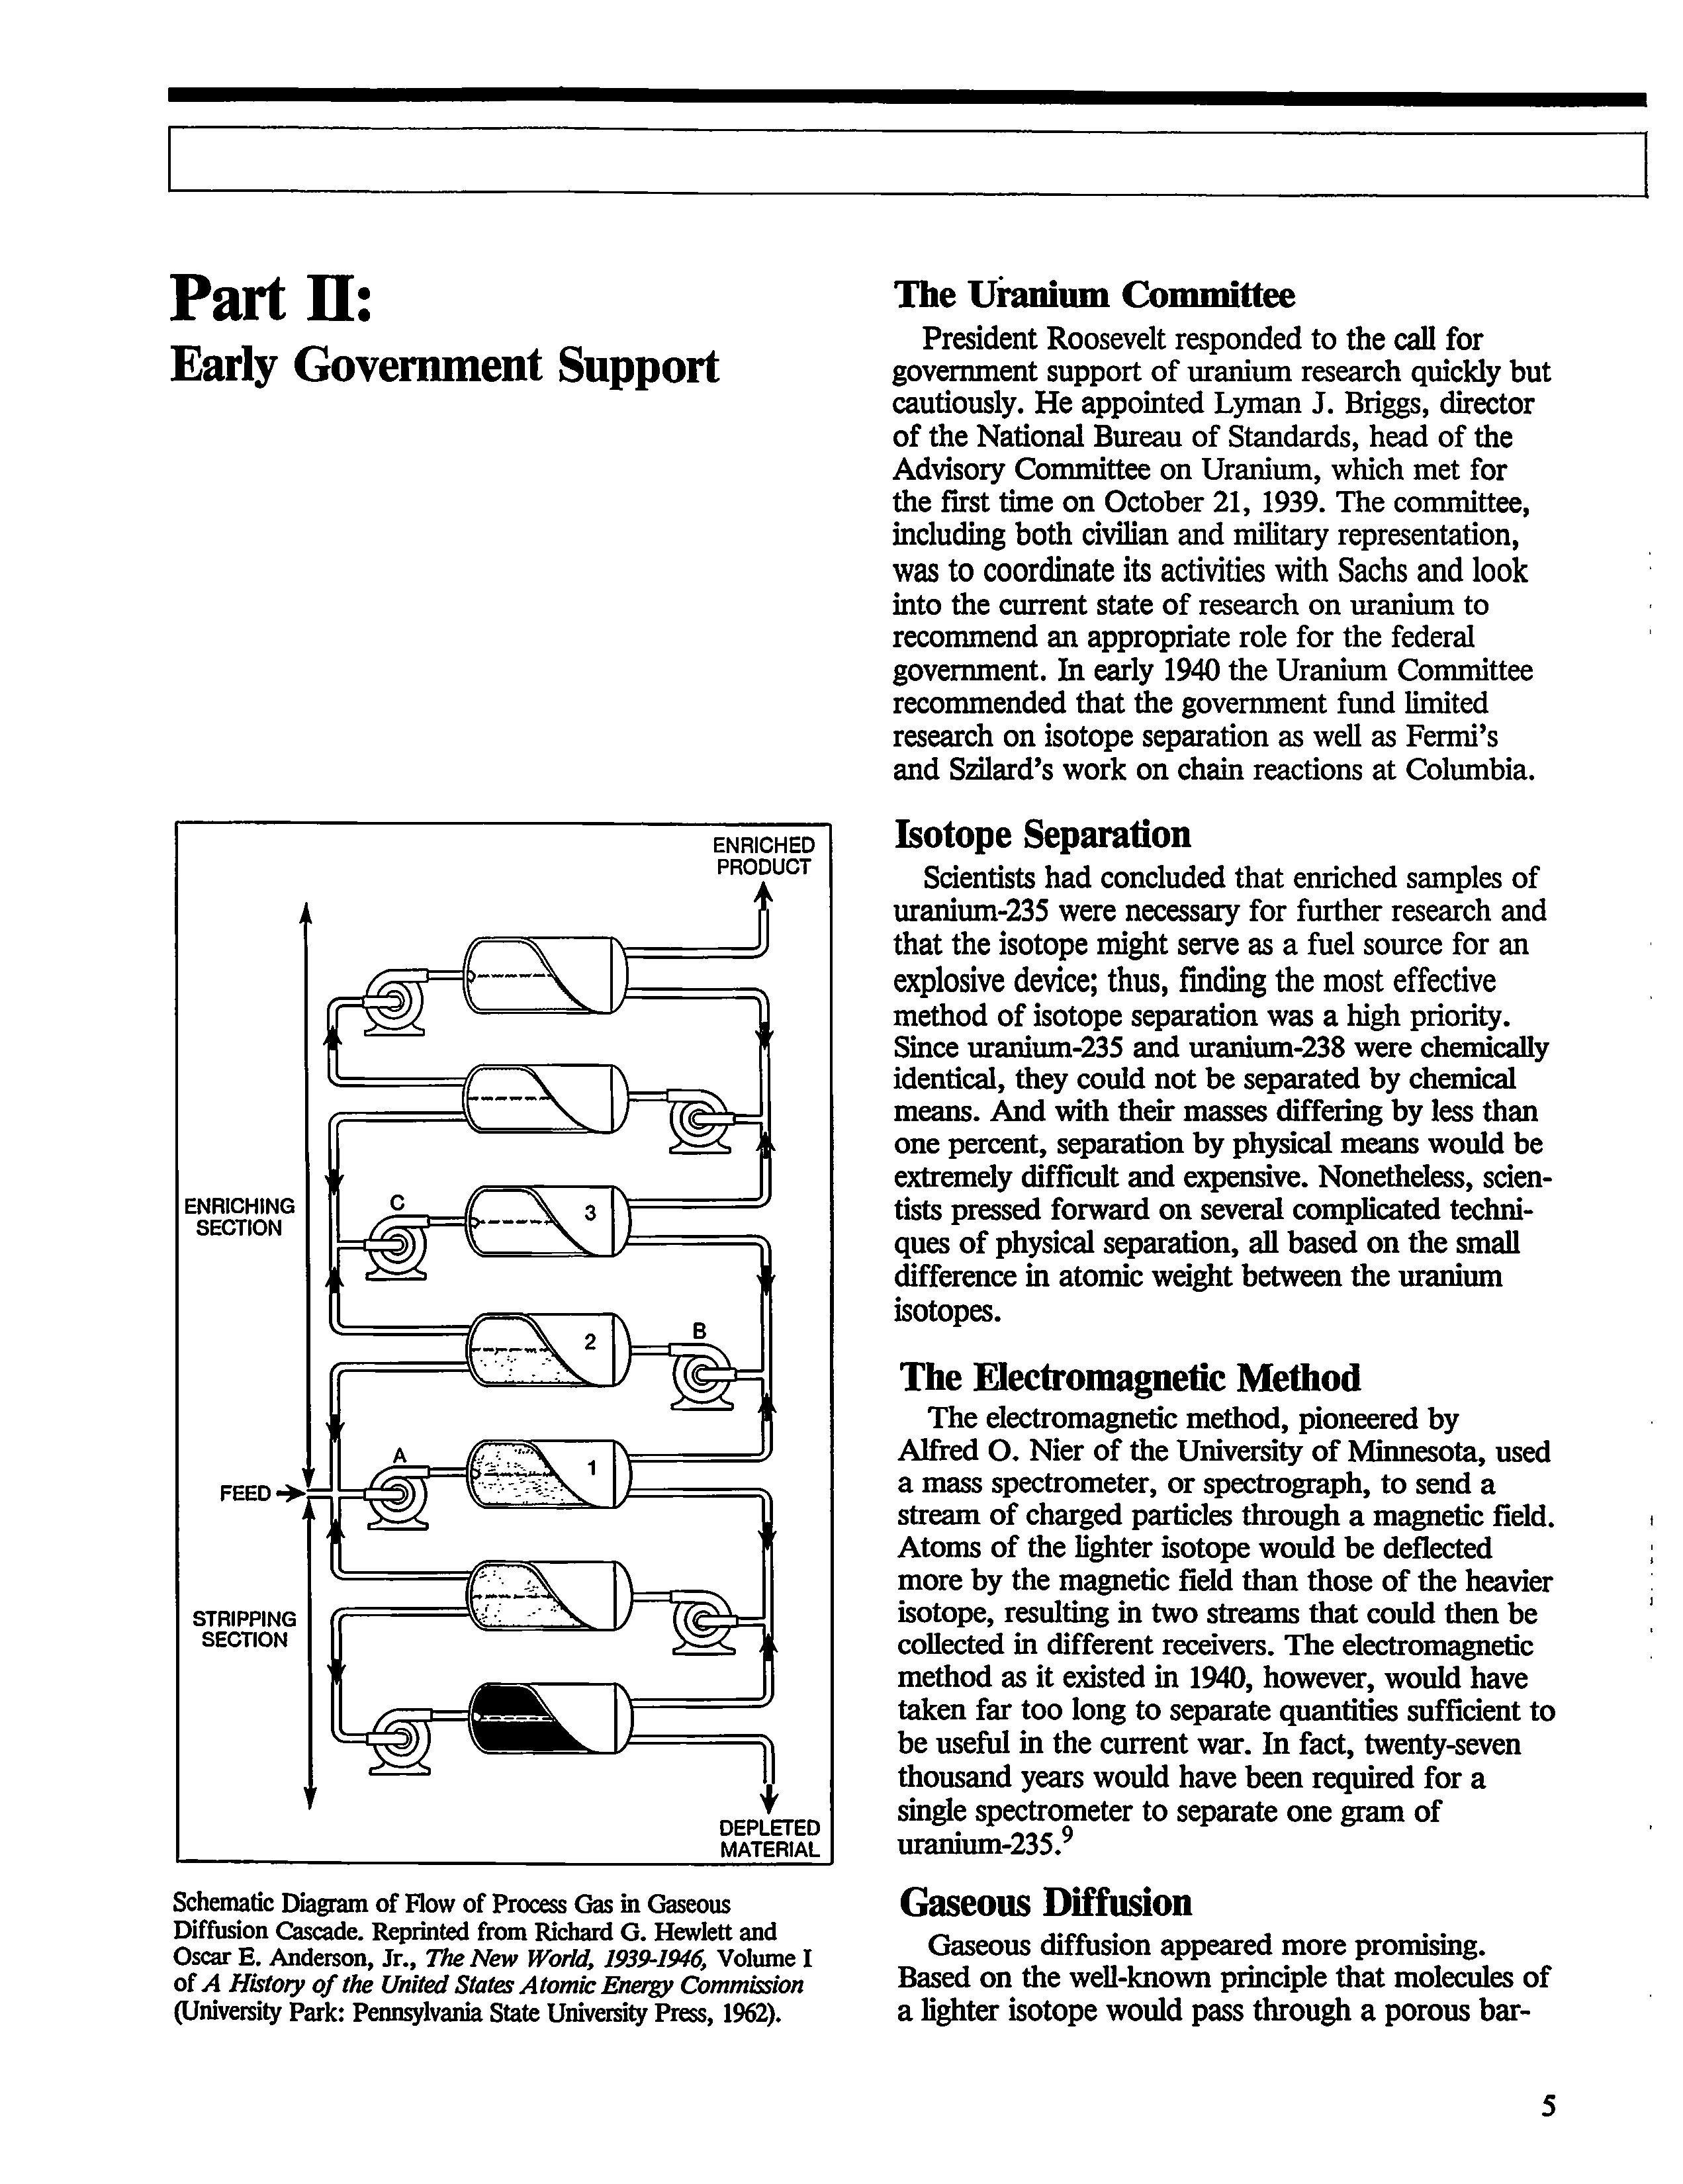 Schematic Diagram of Flow of Process Gas in Gaseous Diffusion Cascade. Reprinted from Richard G. Hewlett and Oscar E. Anderson, Jr., The New World, 1939-1946, Volume I of A History of the United States Atomic Energy Commission (University Park Pennsylvania State University Press, 1962).